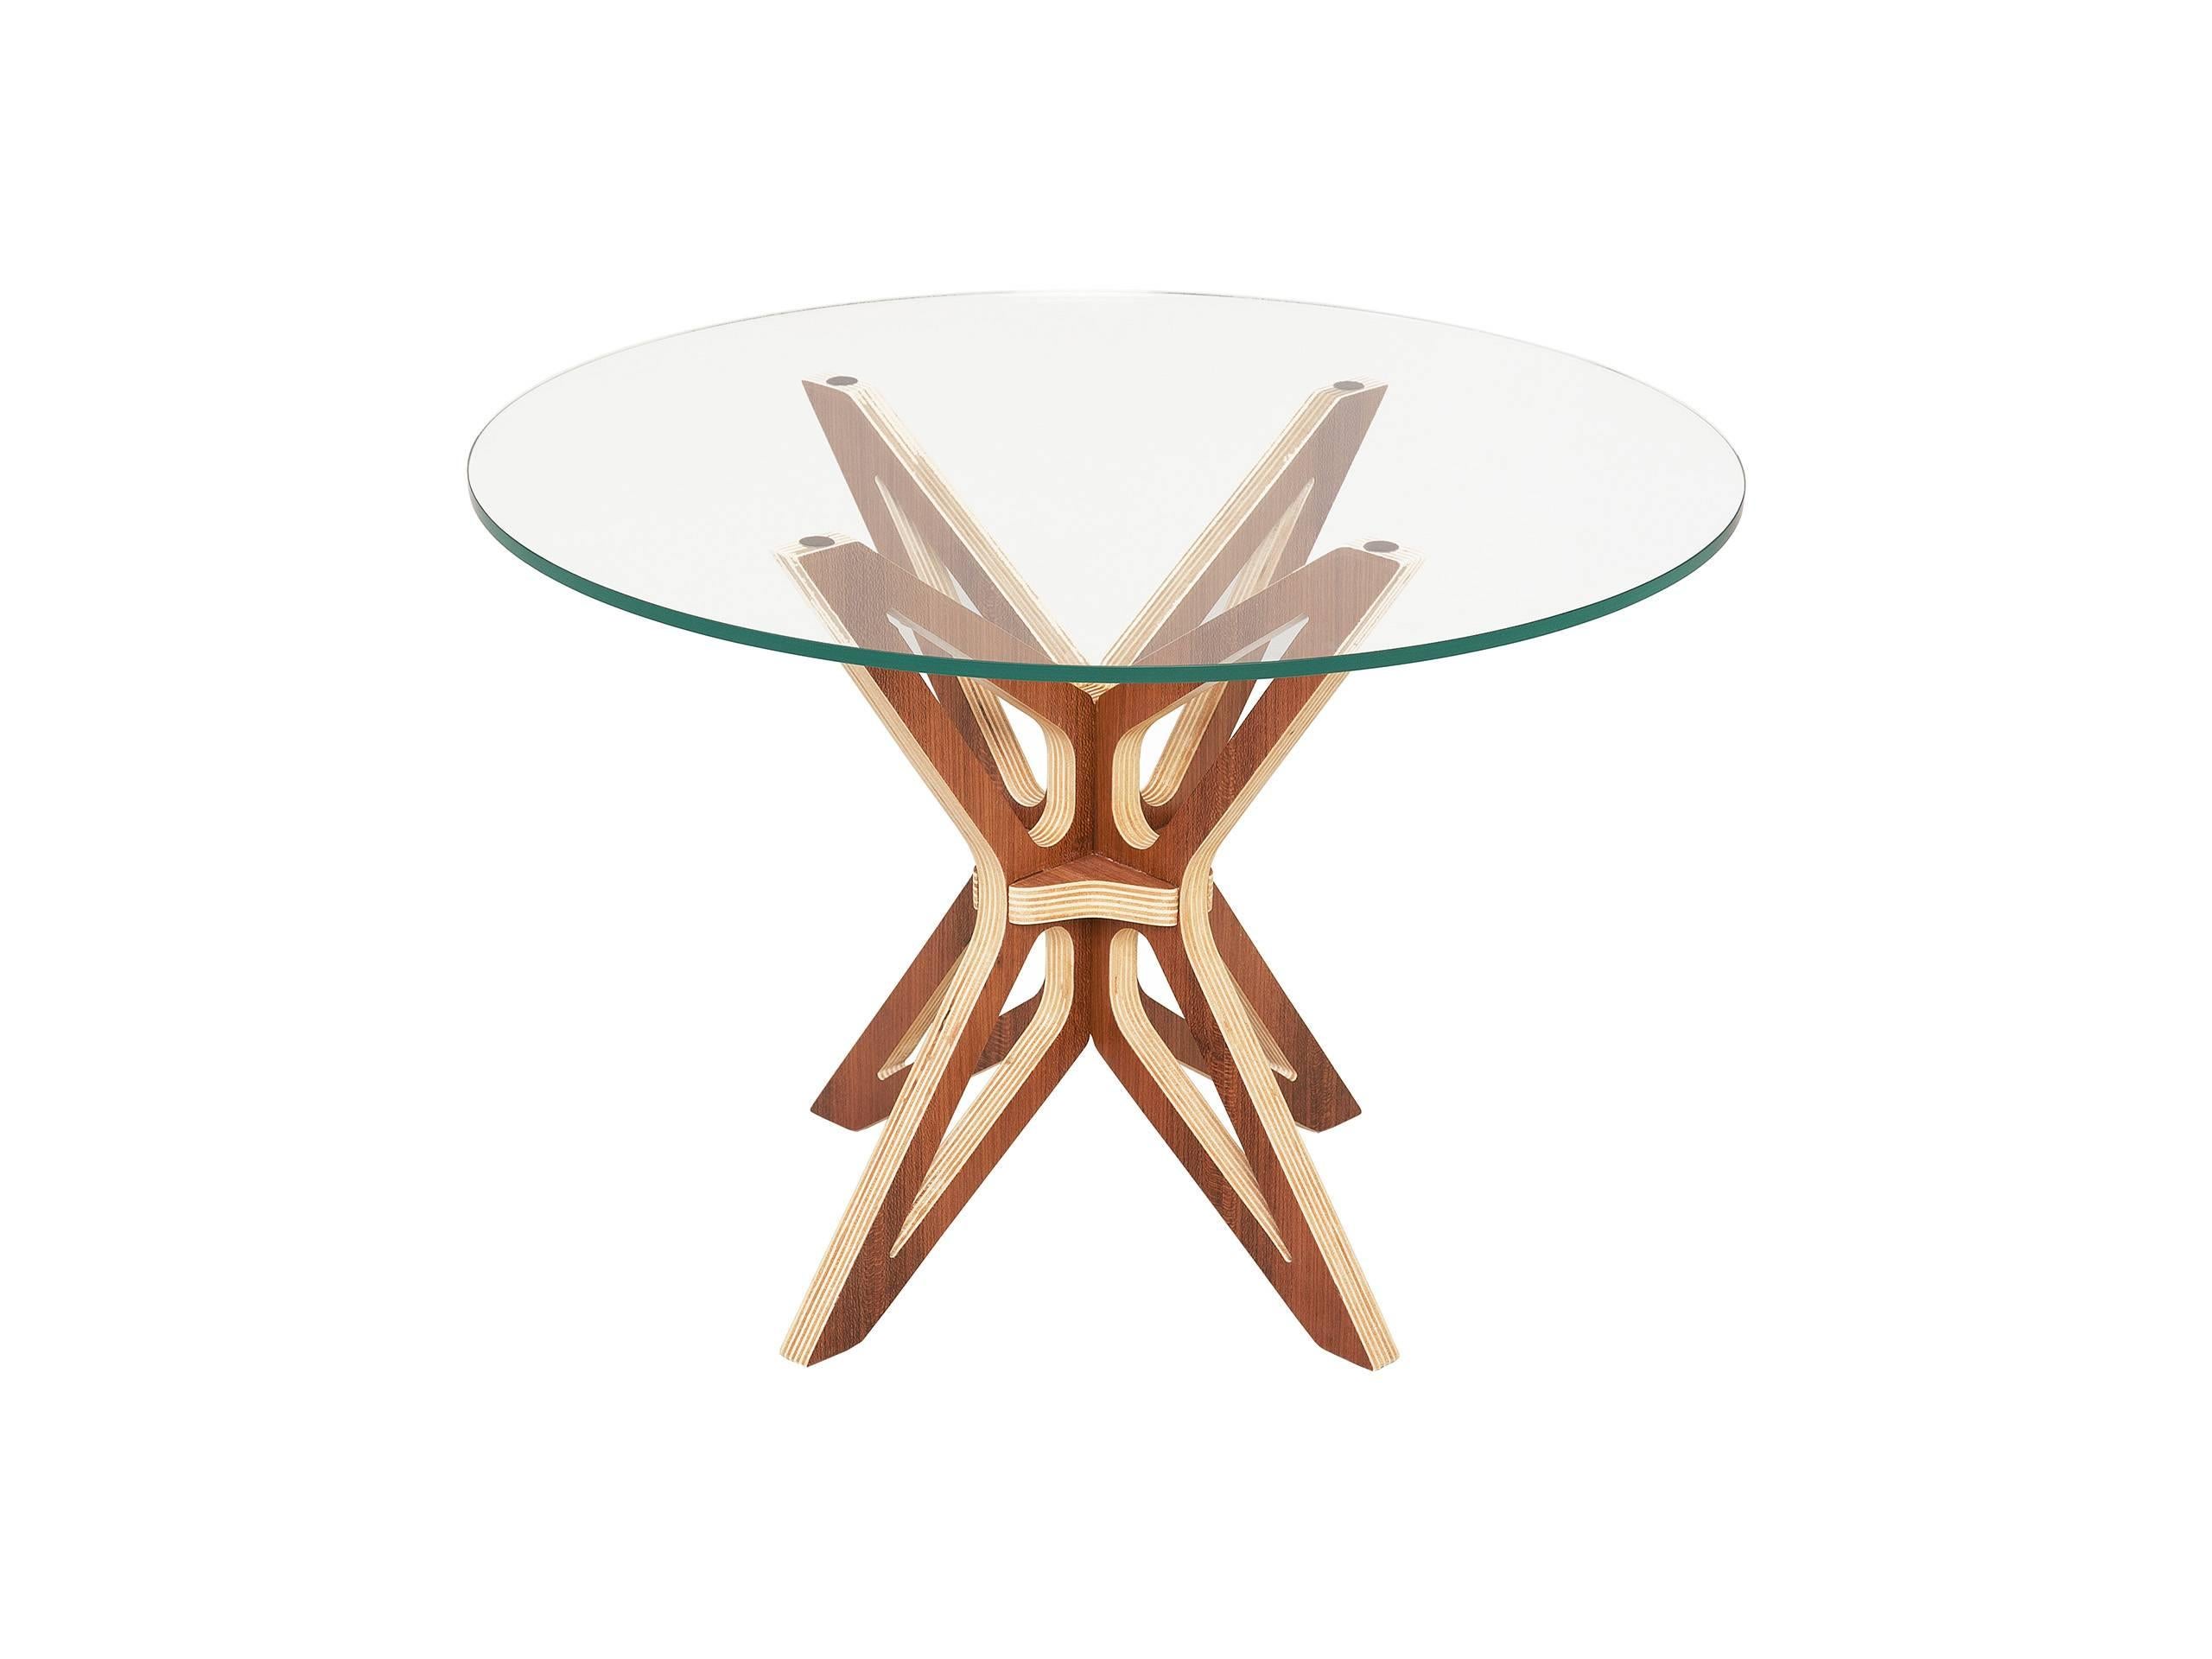 Dining table made of veneer MDF - Its final drawing s a form of open wings of a Moth (Mariposa).

Glass top not included.